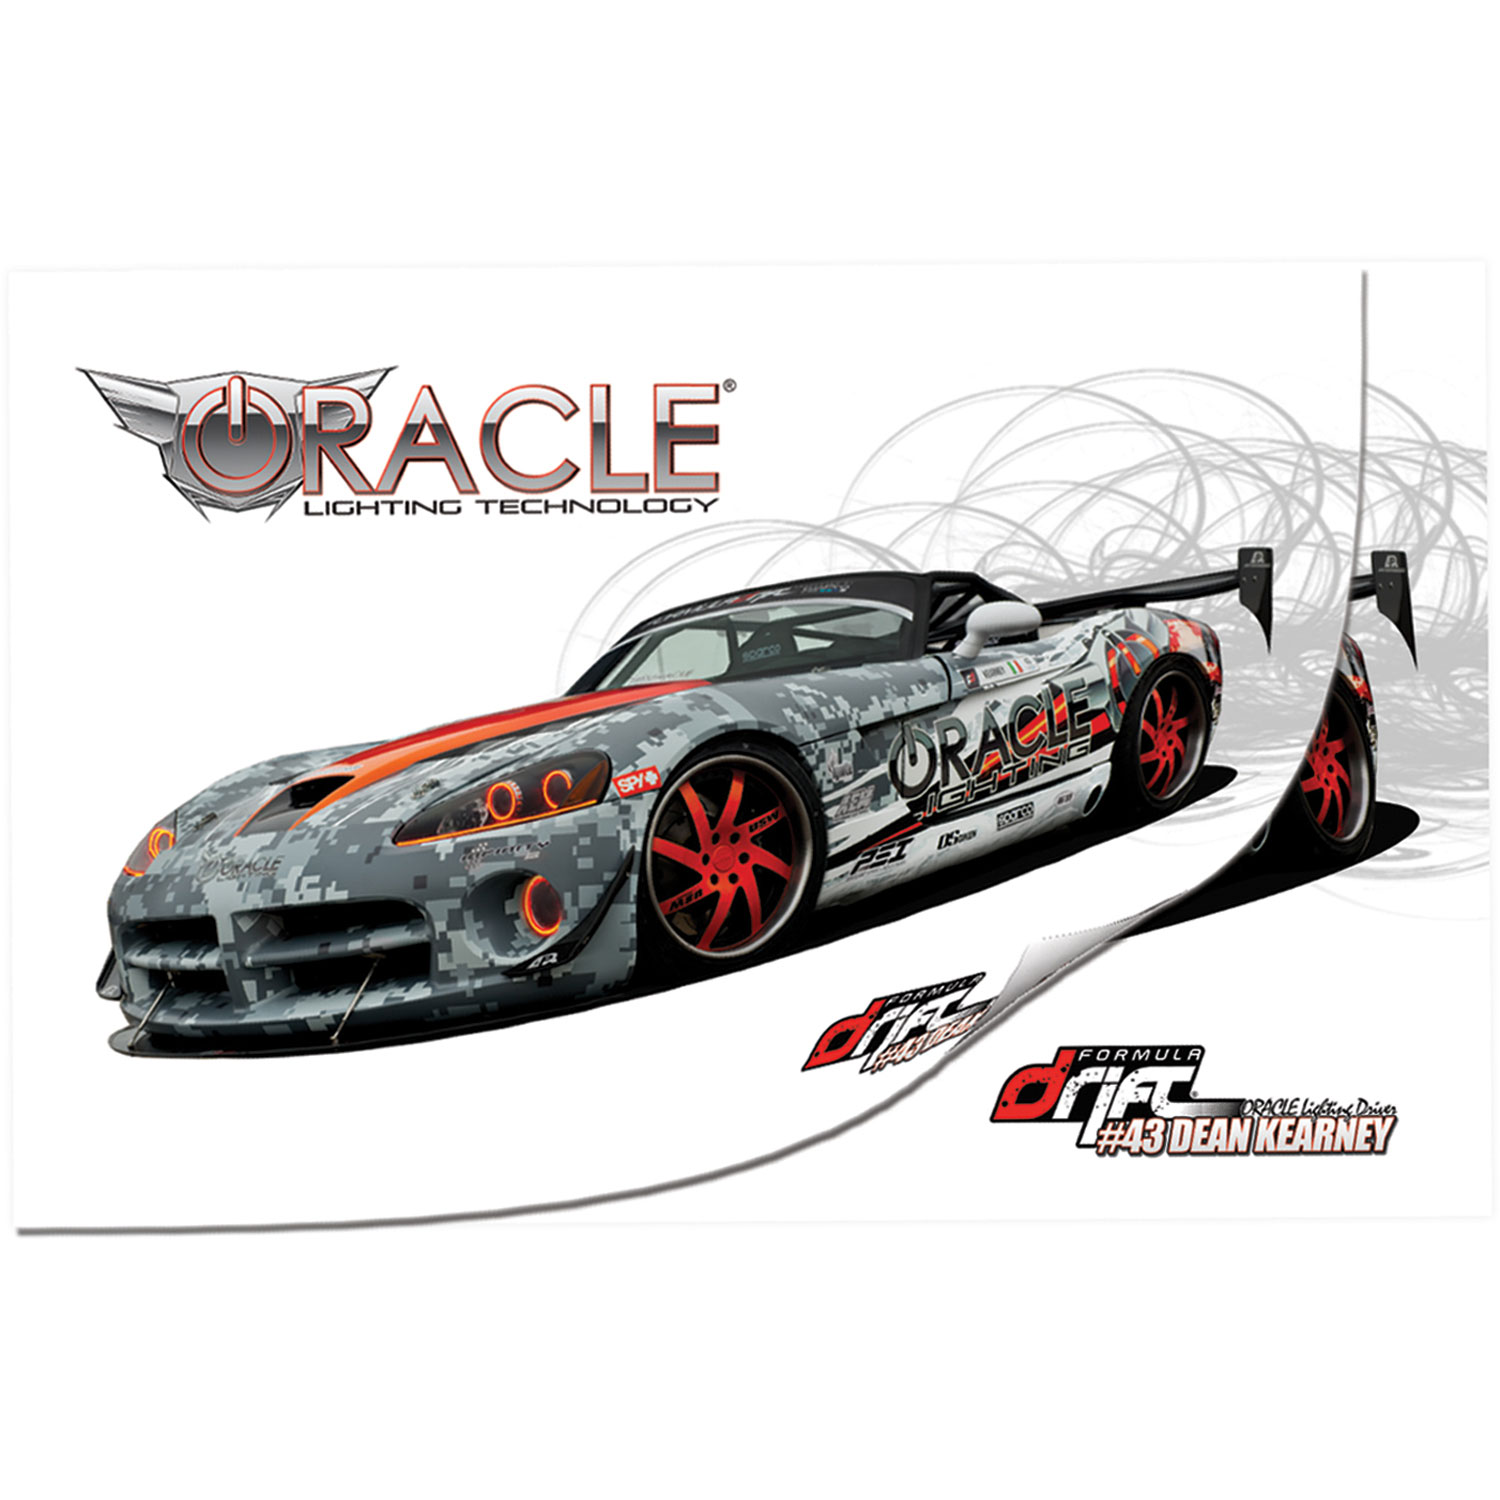 ORACLE Viper Poster 19 x 27